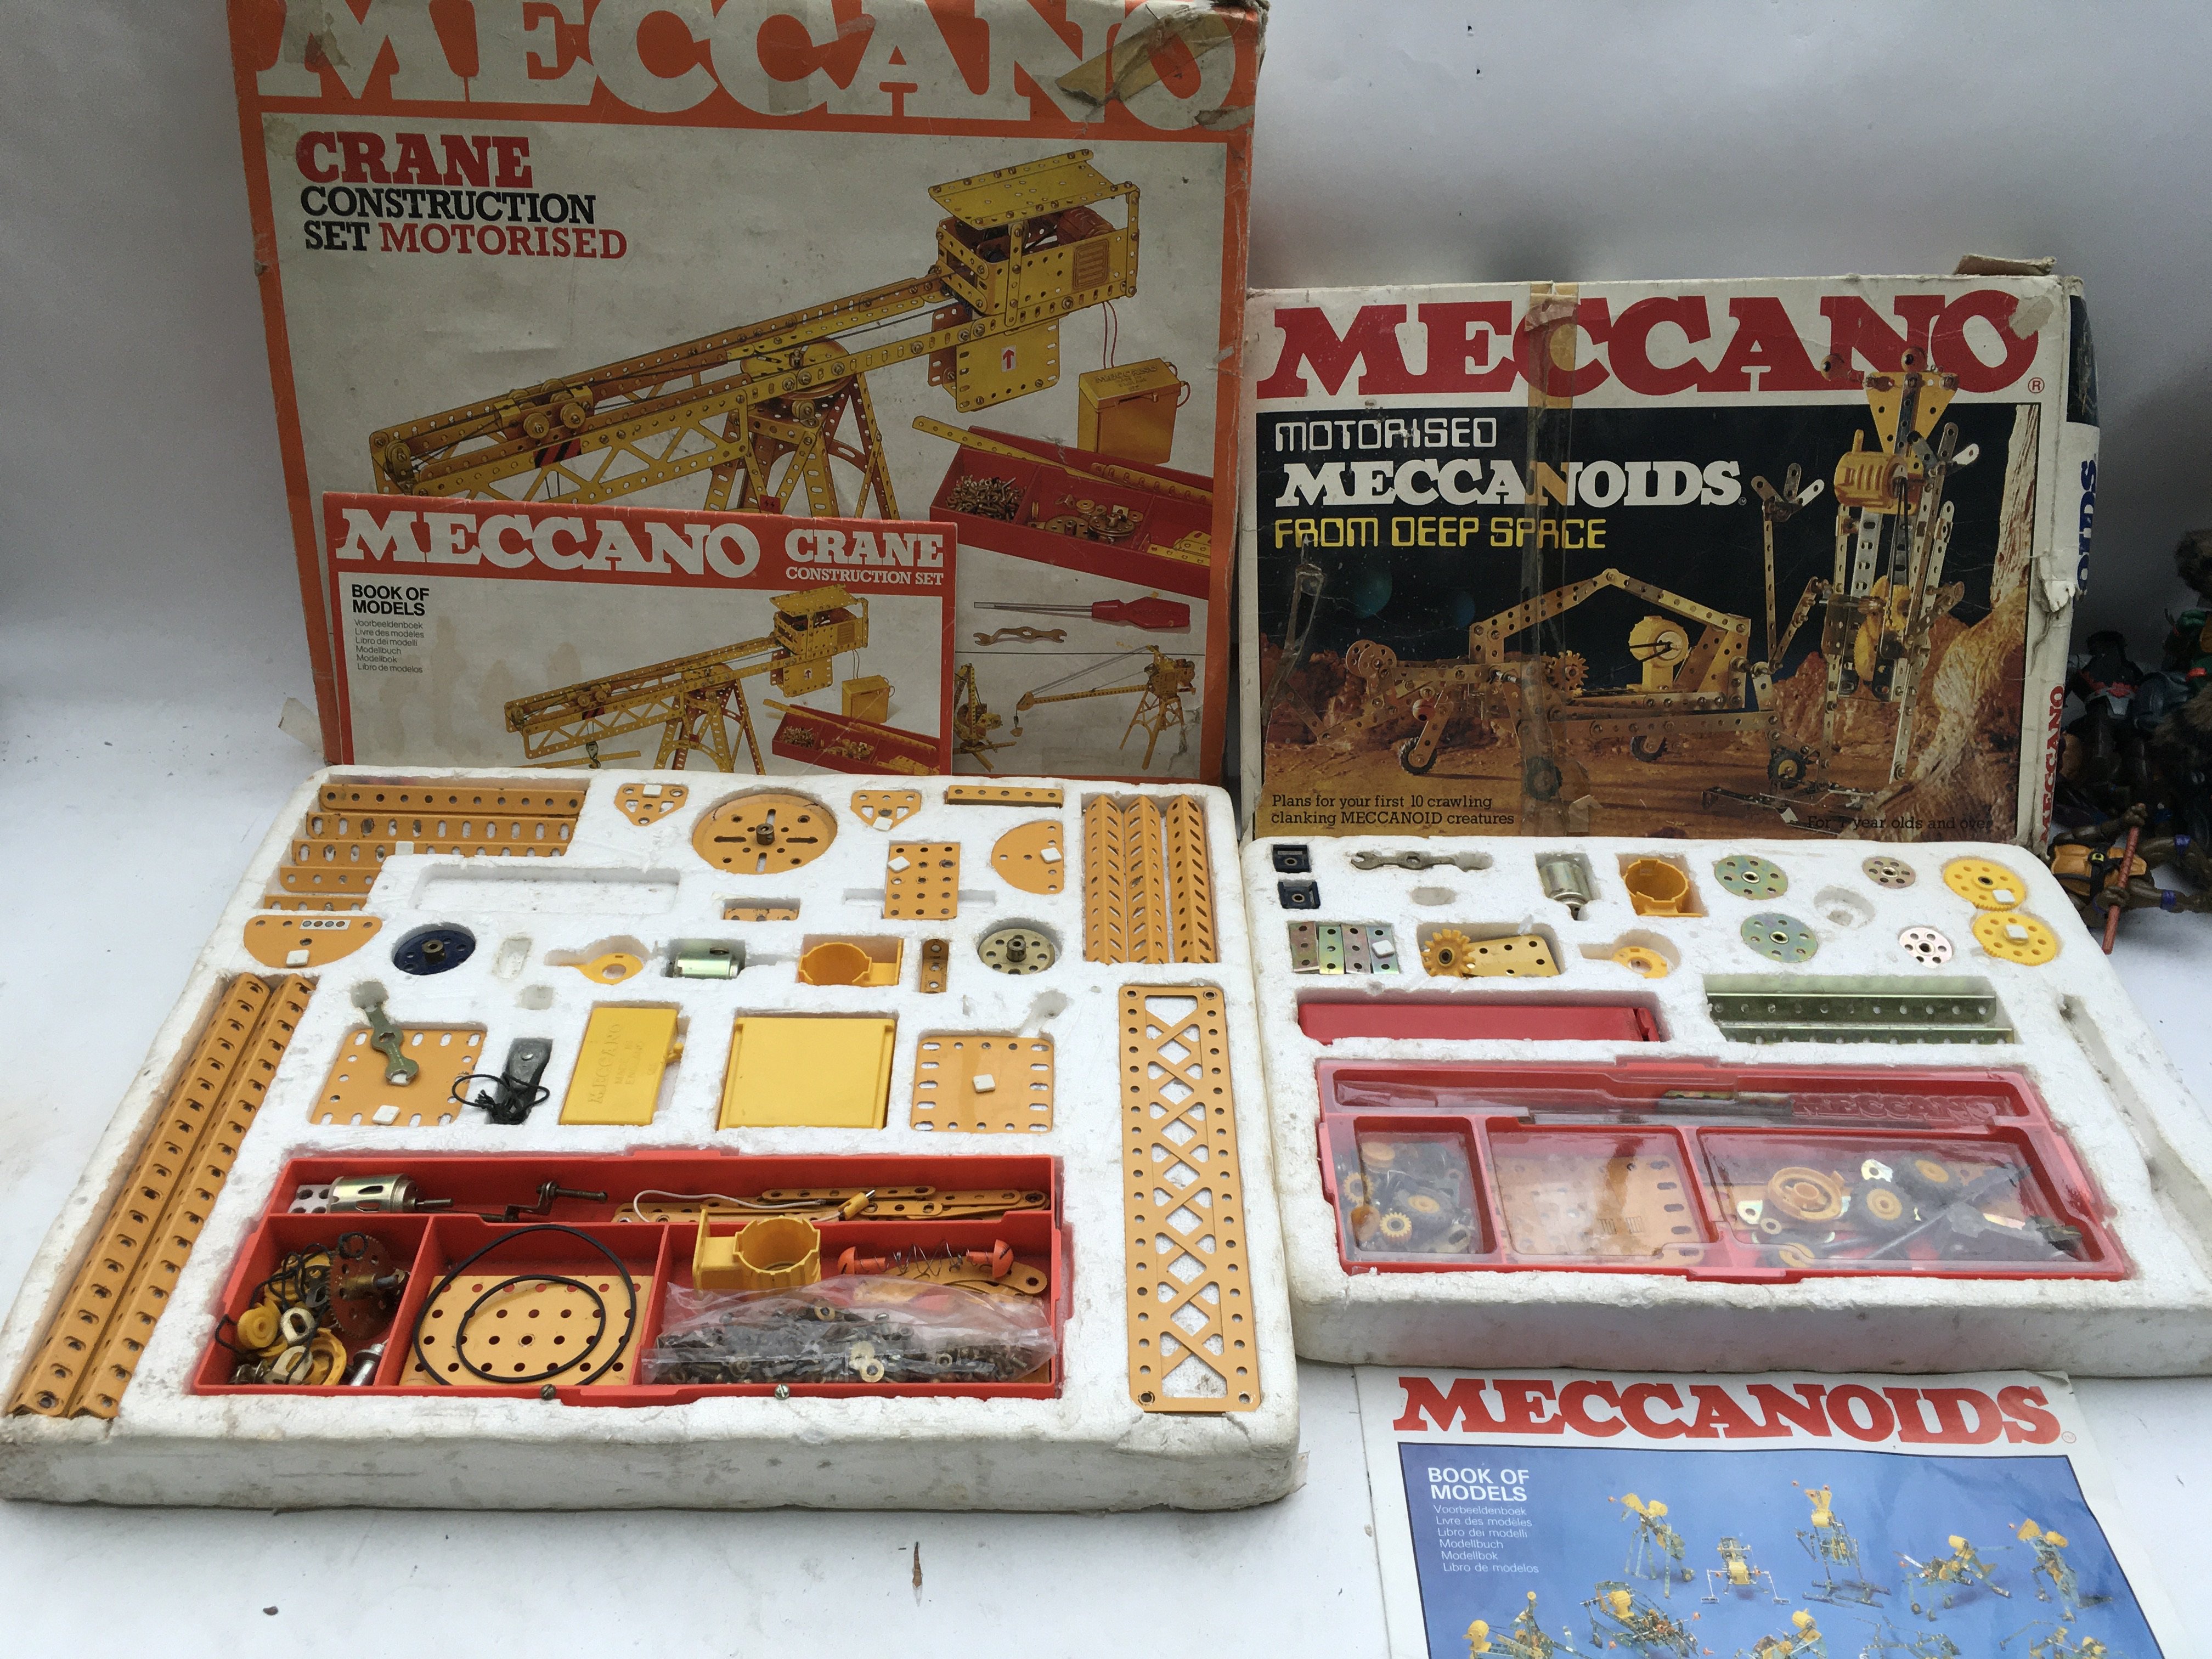 Meccano sets, boxed including Crane construction set motorised and Meccanoids from Deep Space also